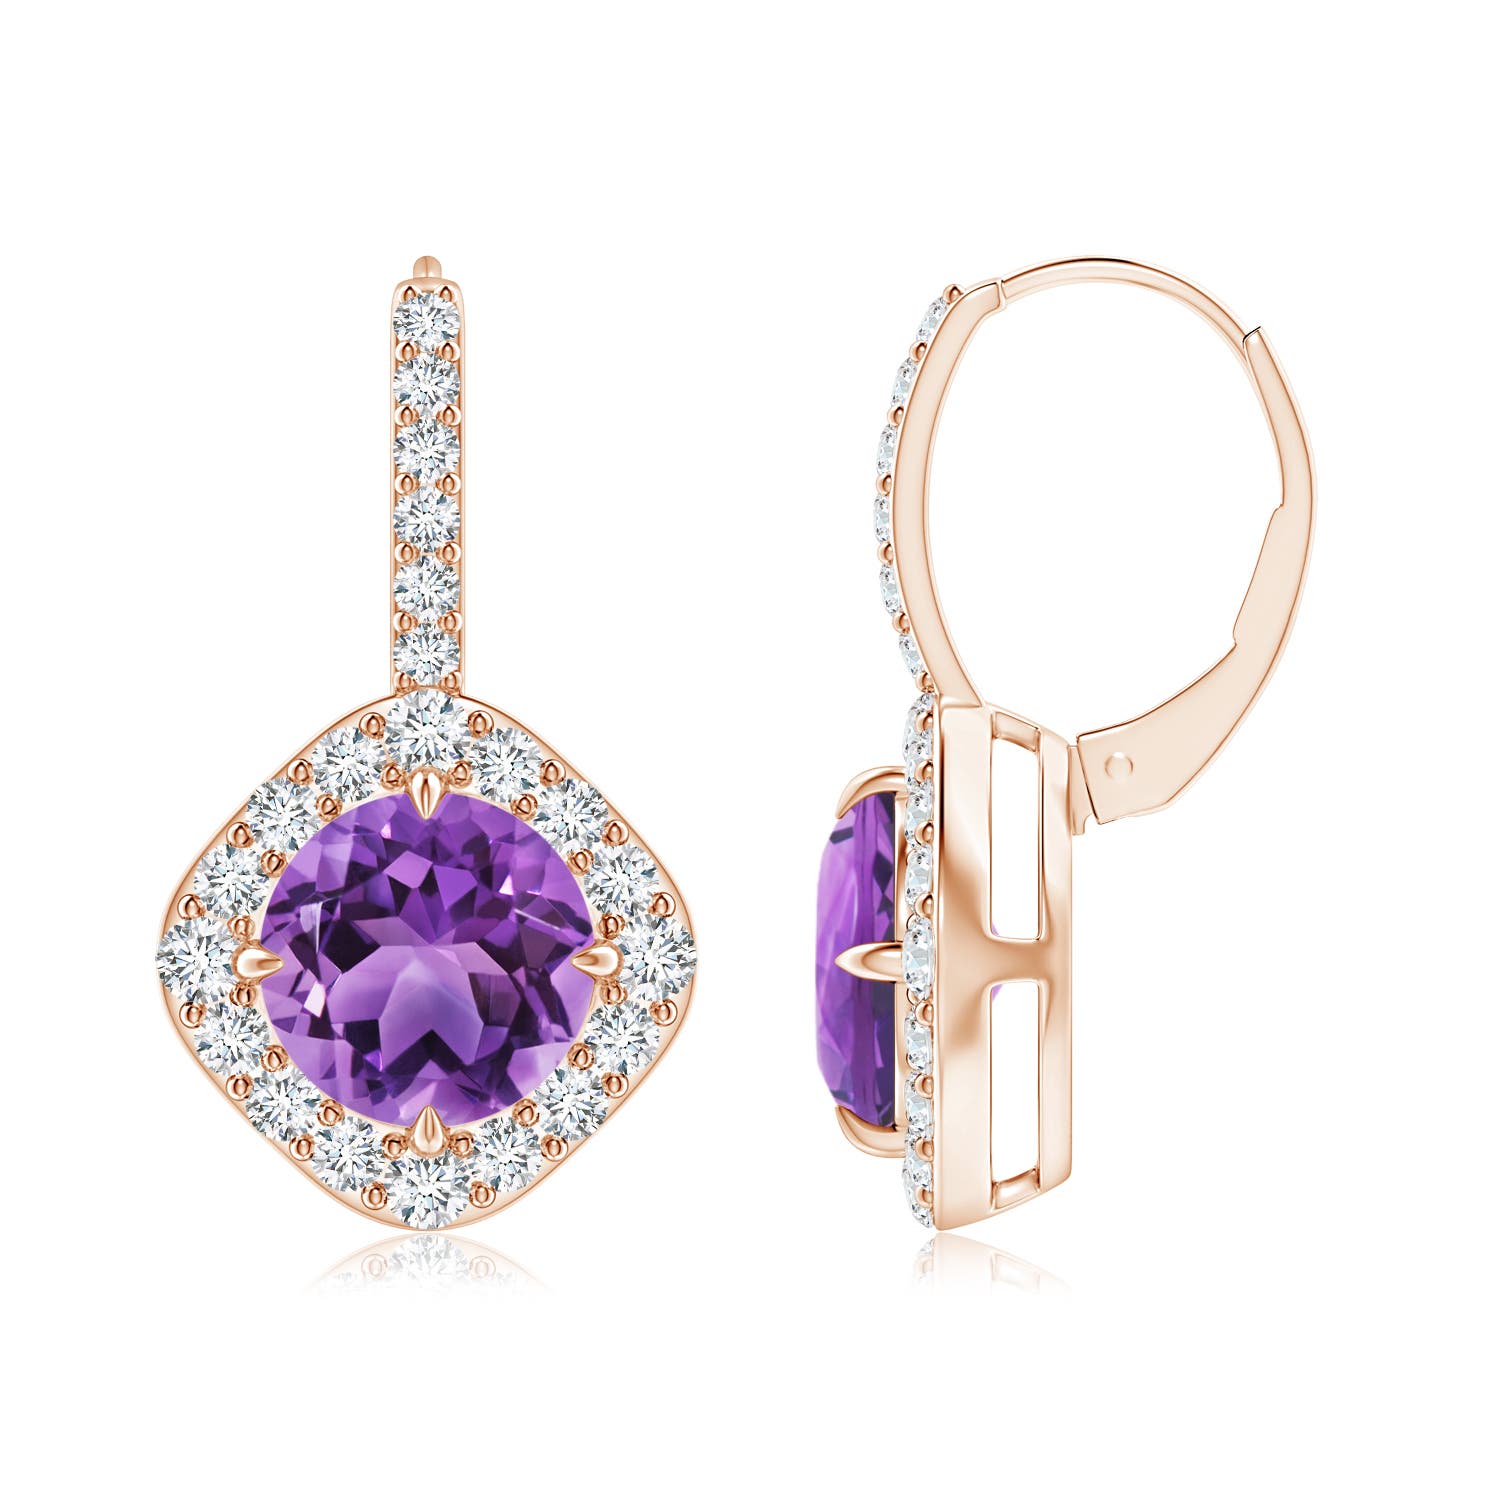 AA - Amethyst / 4.15 CT / 14 KT Rose Gold